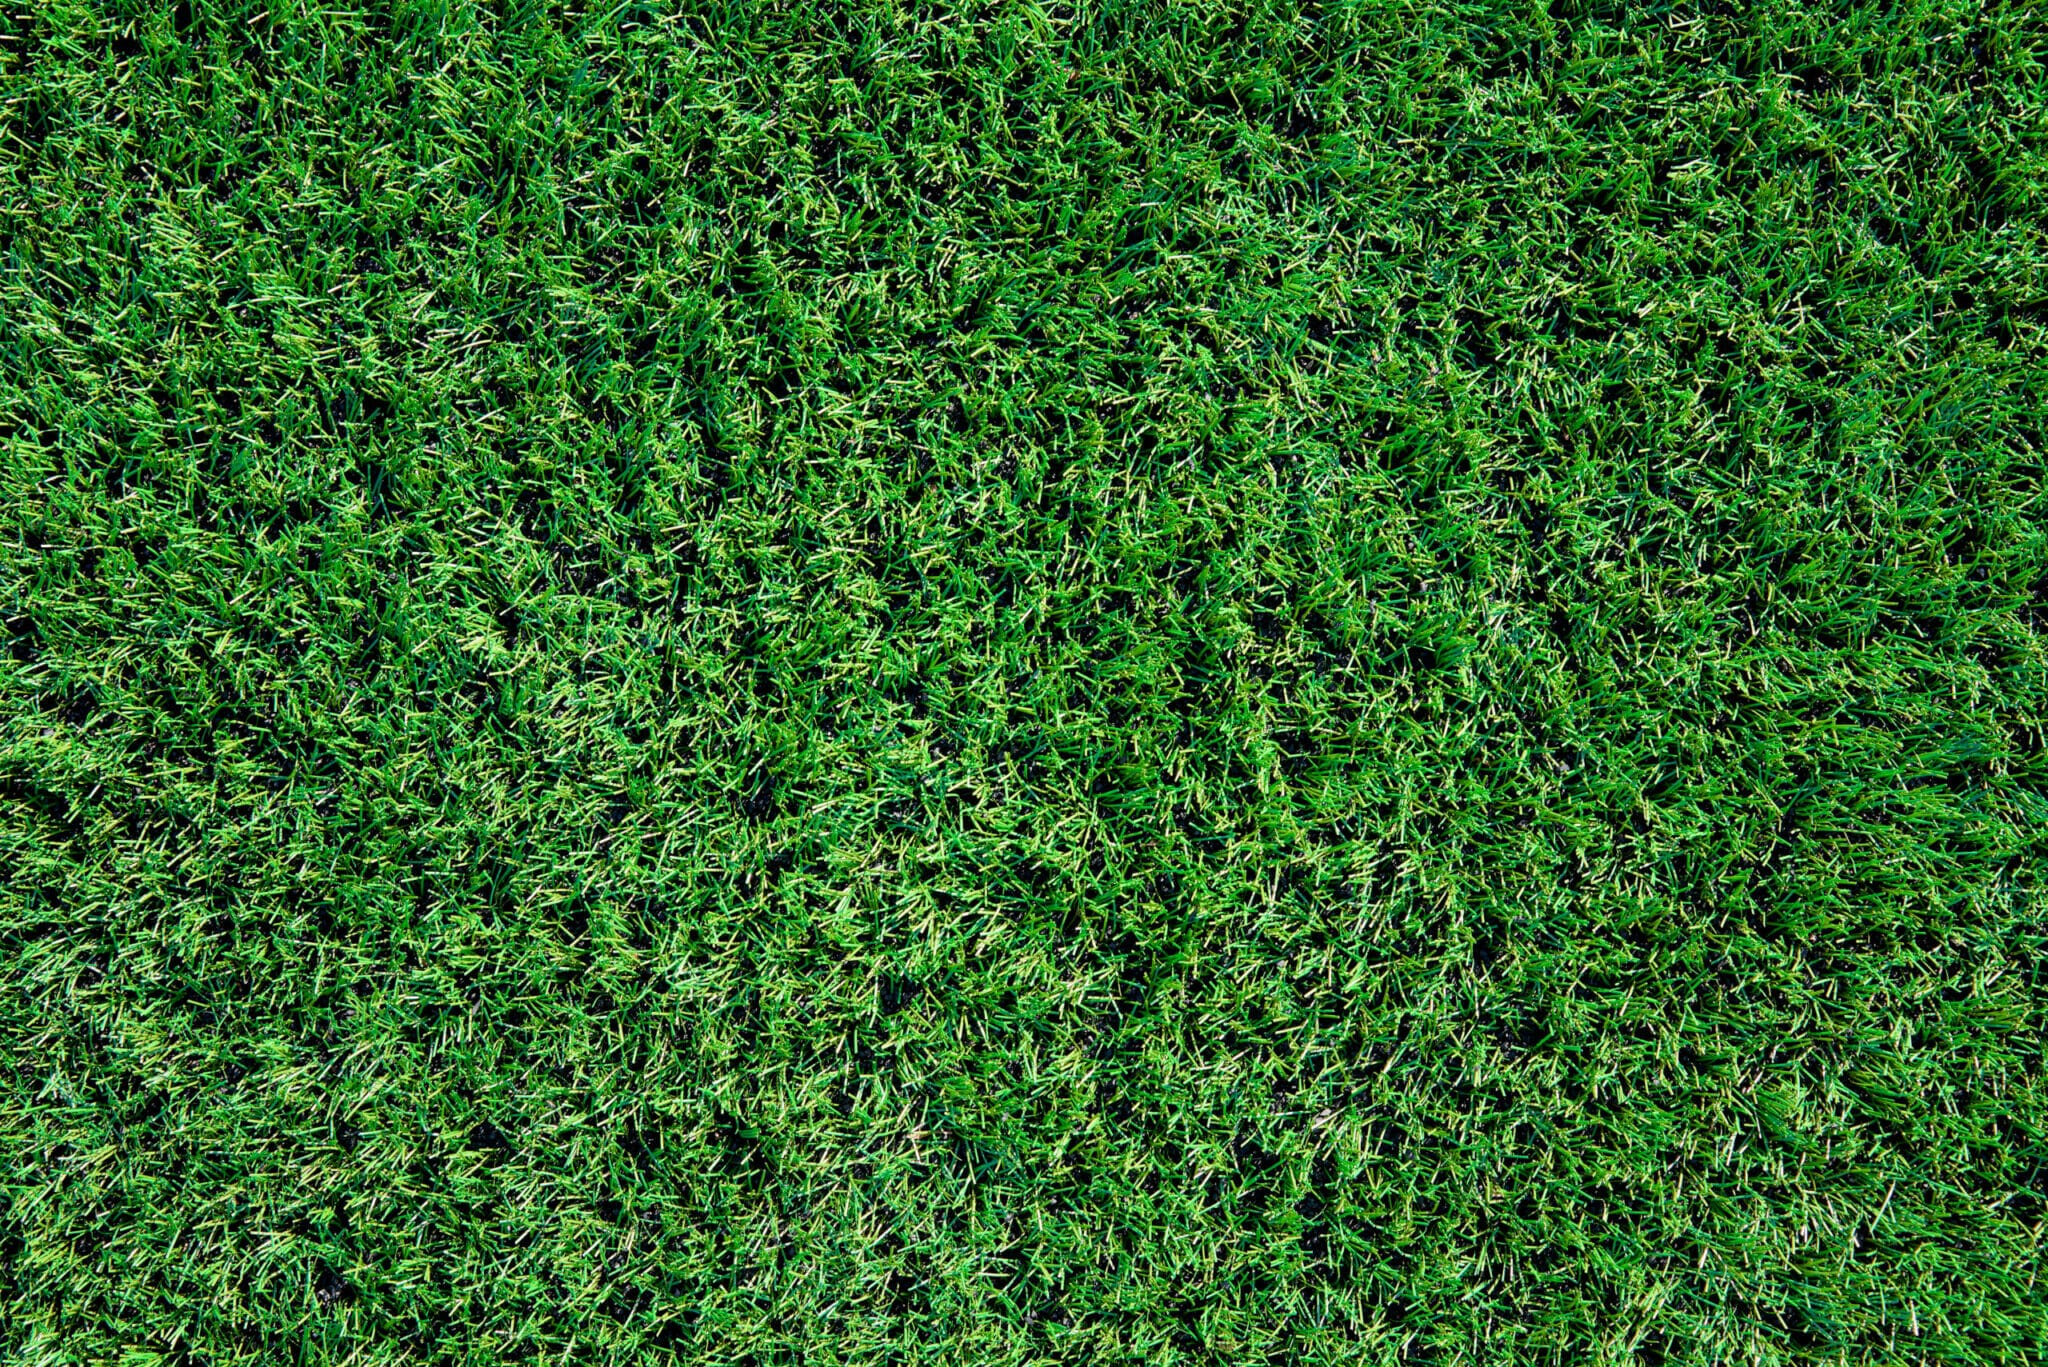 Can dogs pee and poop on artificial grass?